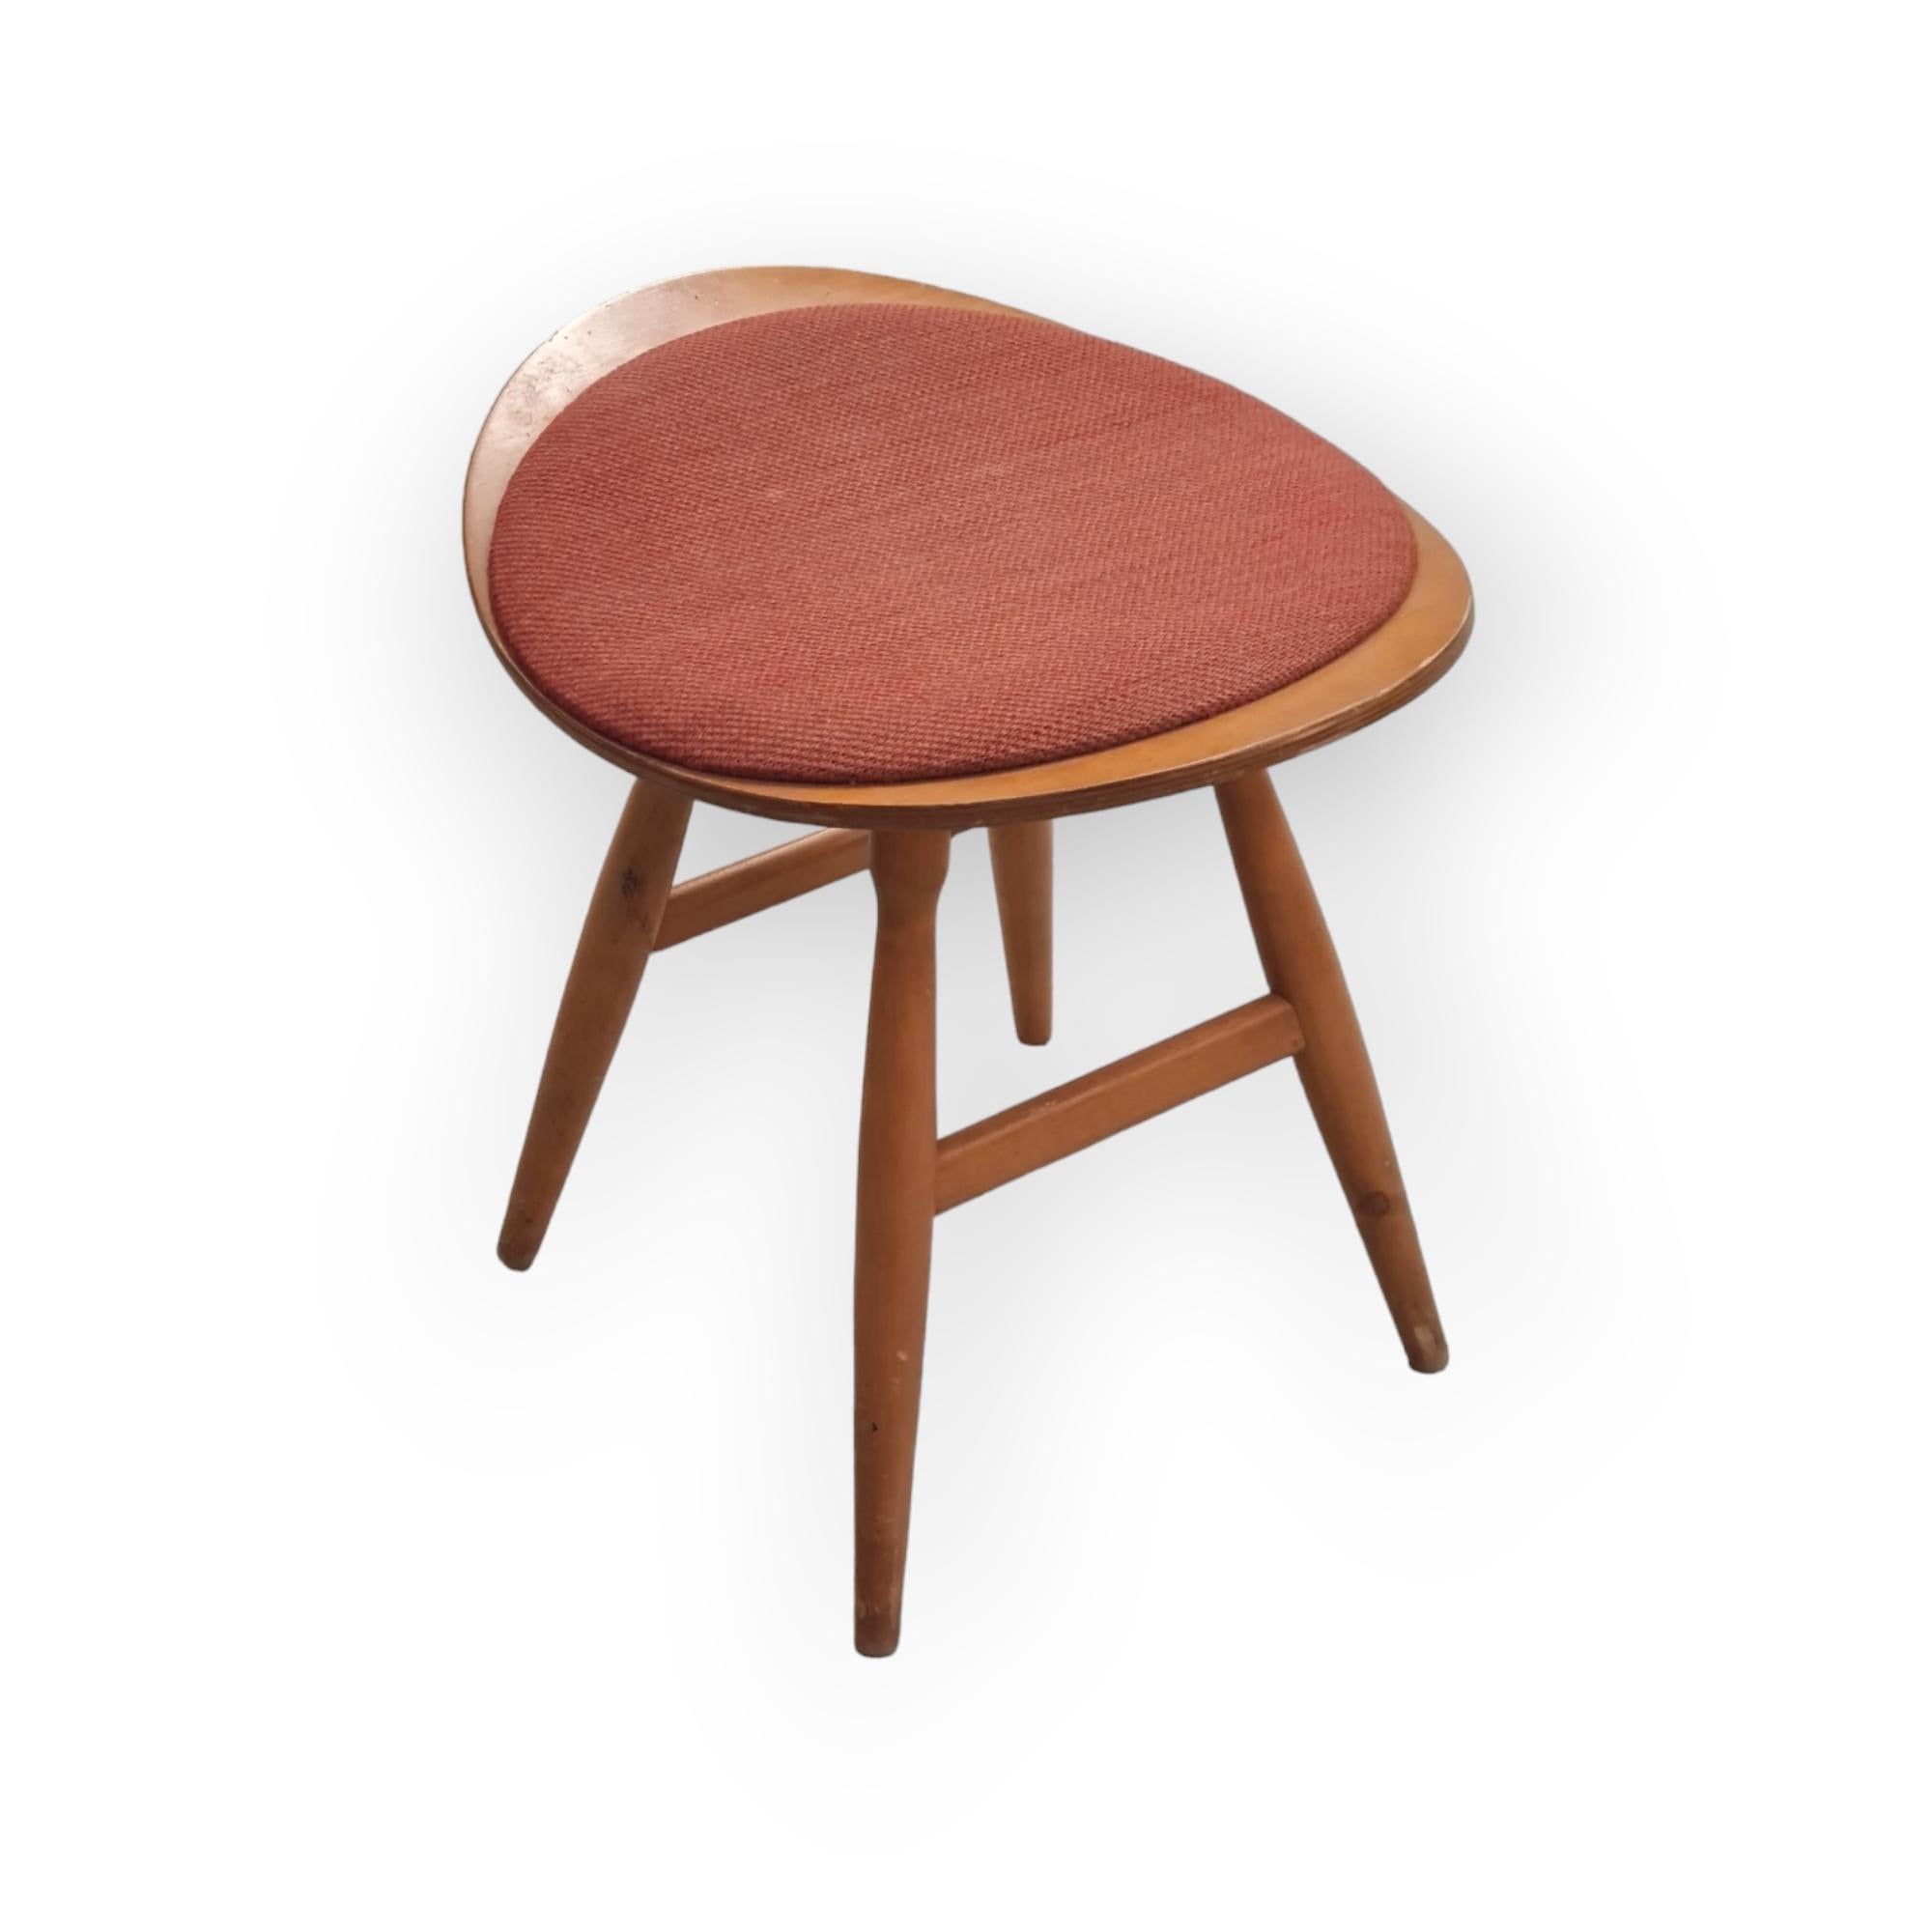 By Keravan Puuseppätehdas for Stockmann.
A quite simple yet elegant stool by Ottelin. The stool is quite sturdy and sits firmly in place . Can easily be used in almost any room, even the children's room.
It also has an authentic vintage look and